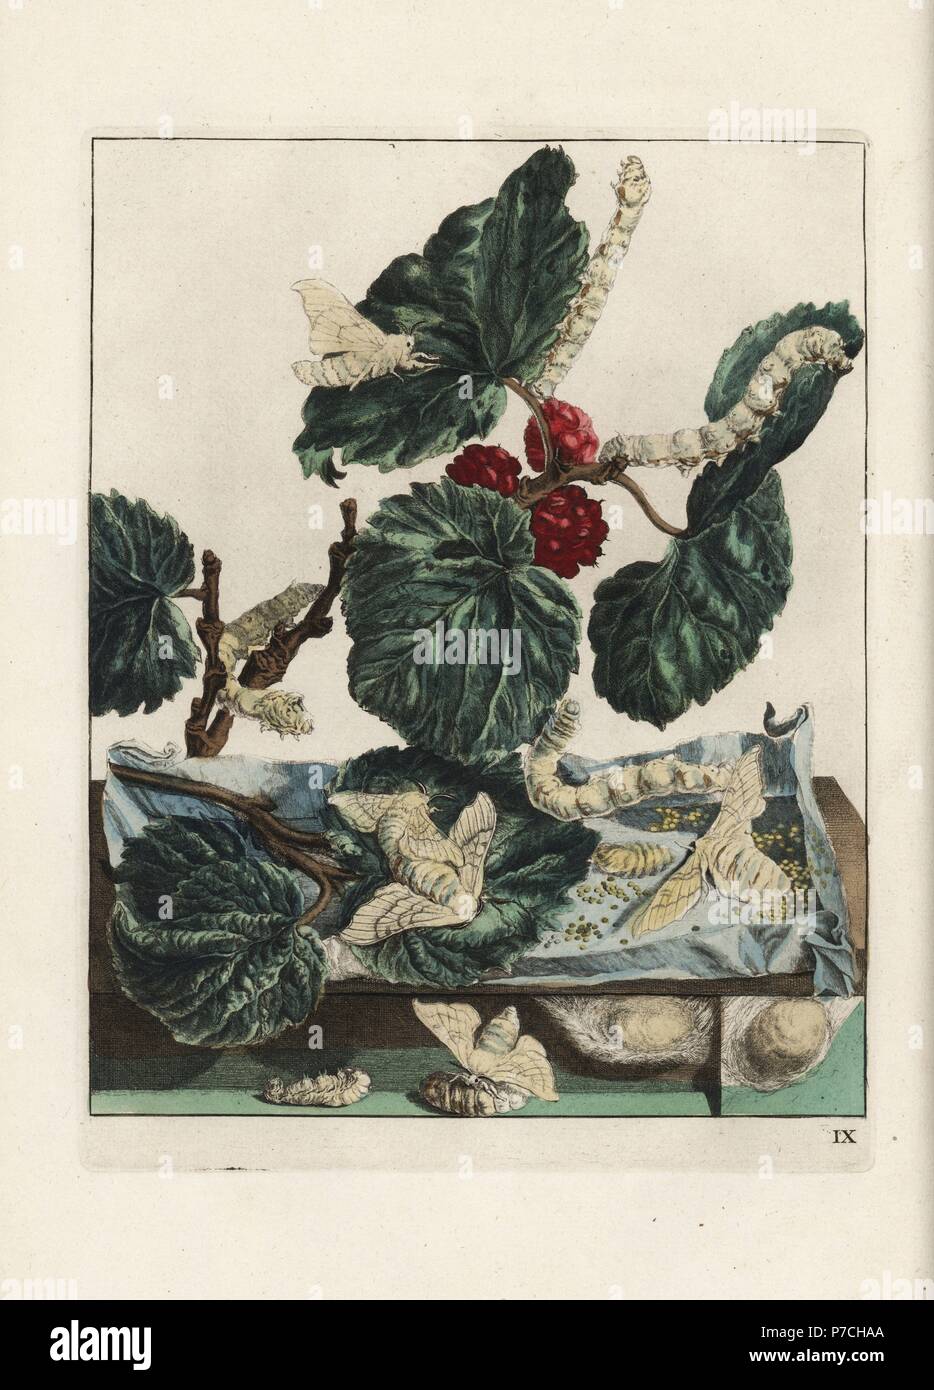 Silk moth and silkworm, Bombyx mori, on mulberry leaves, Morus alba. Handcoloured copperplate engraving drawn and etched by Jacob l'Admiral in Naauwkeurige Waarneemingen omtrent de veranderingen van veele Insekten (Accurate Descriptions of the Metamorphoses of Insects), J. Sluyter, Amsterdam, 1774. For this second edition, M. Houttuyn added another eight plates to the original 25. Stock Photo